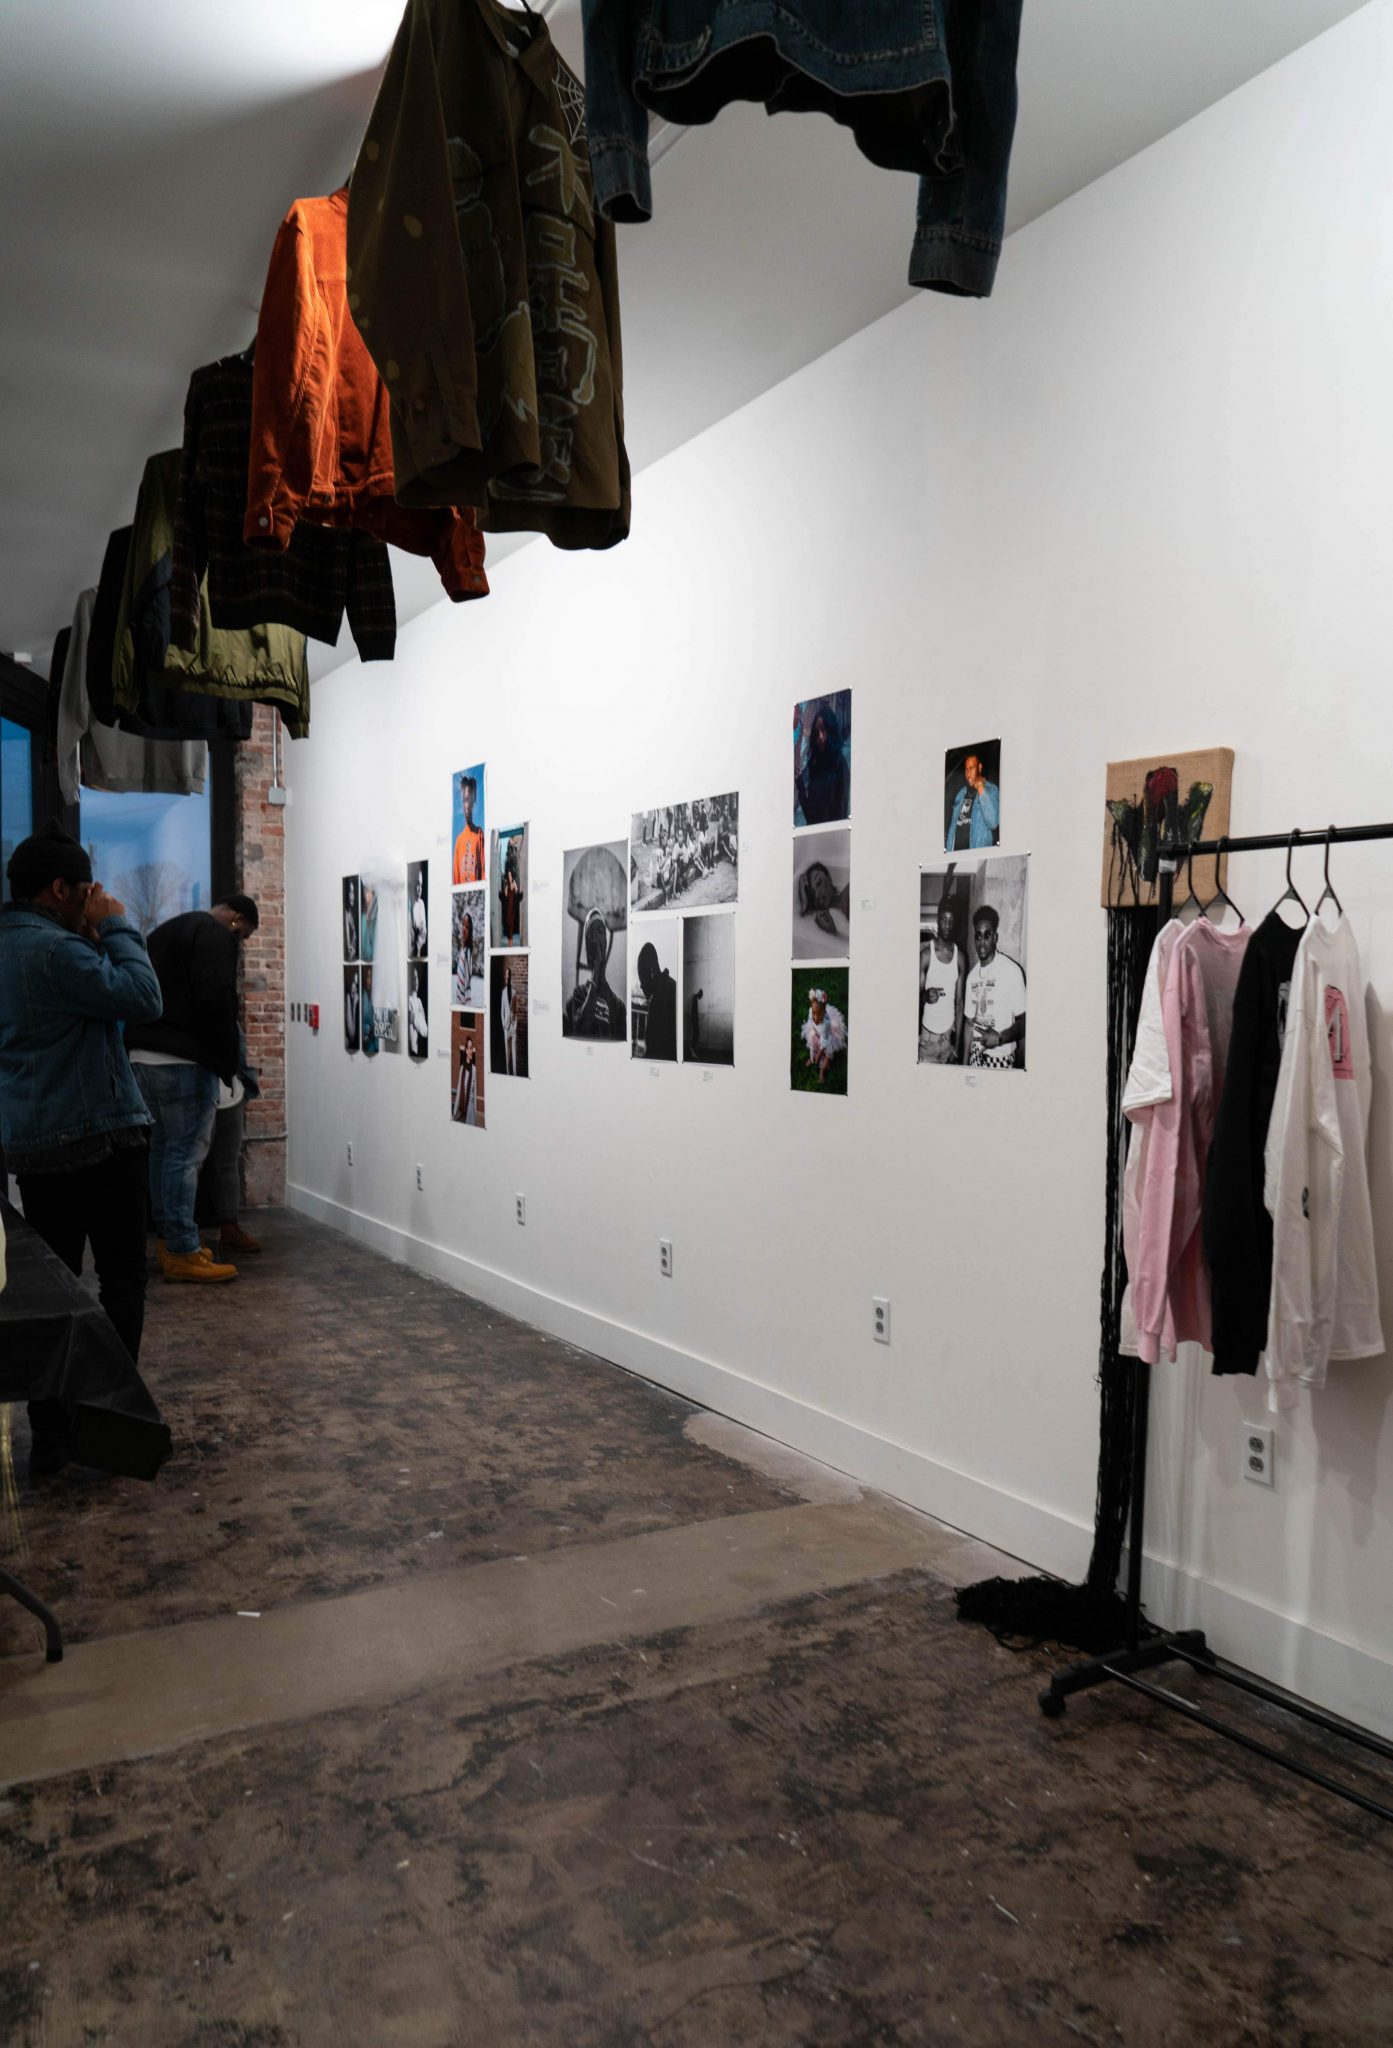 A photo of art on the walls with a clothing rack on the right and coats hanging from above